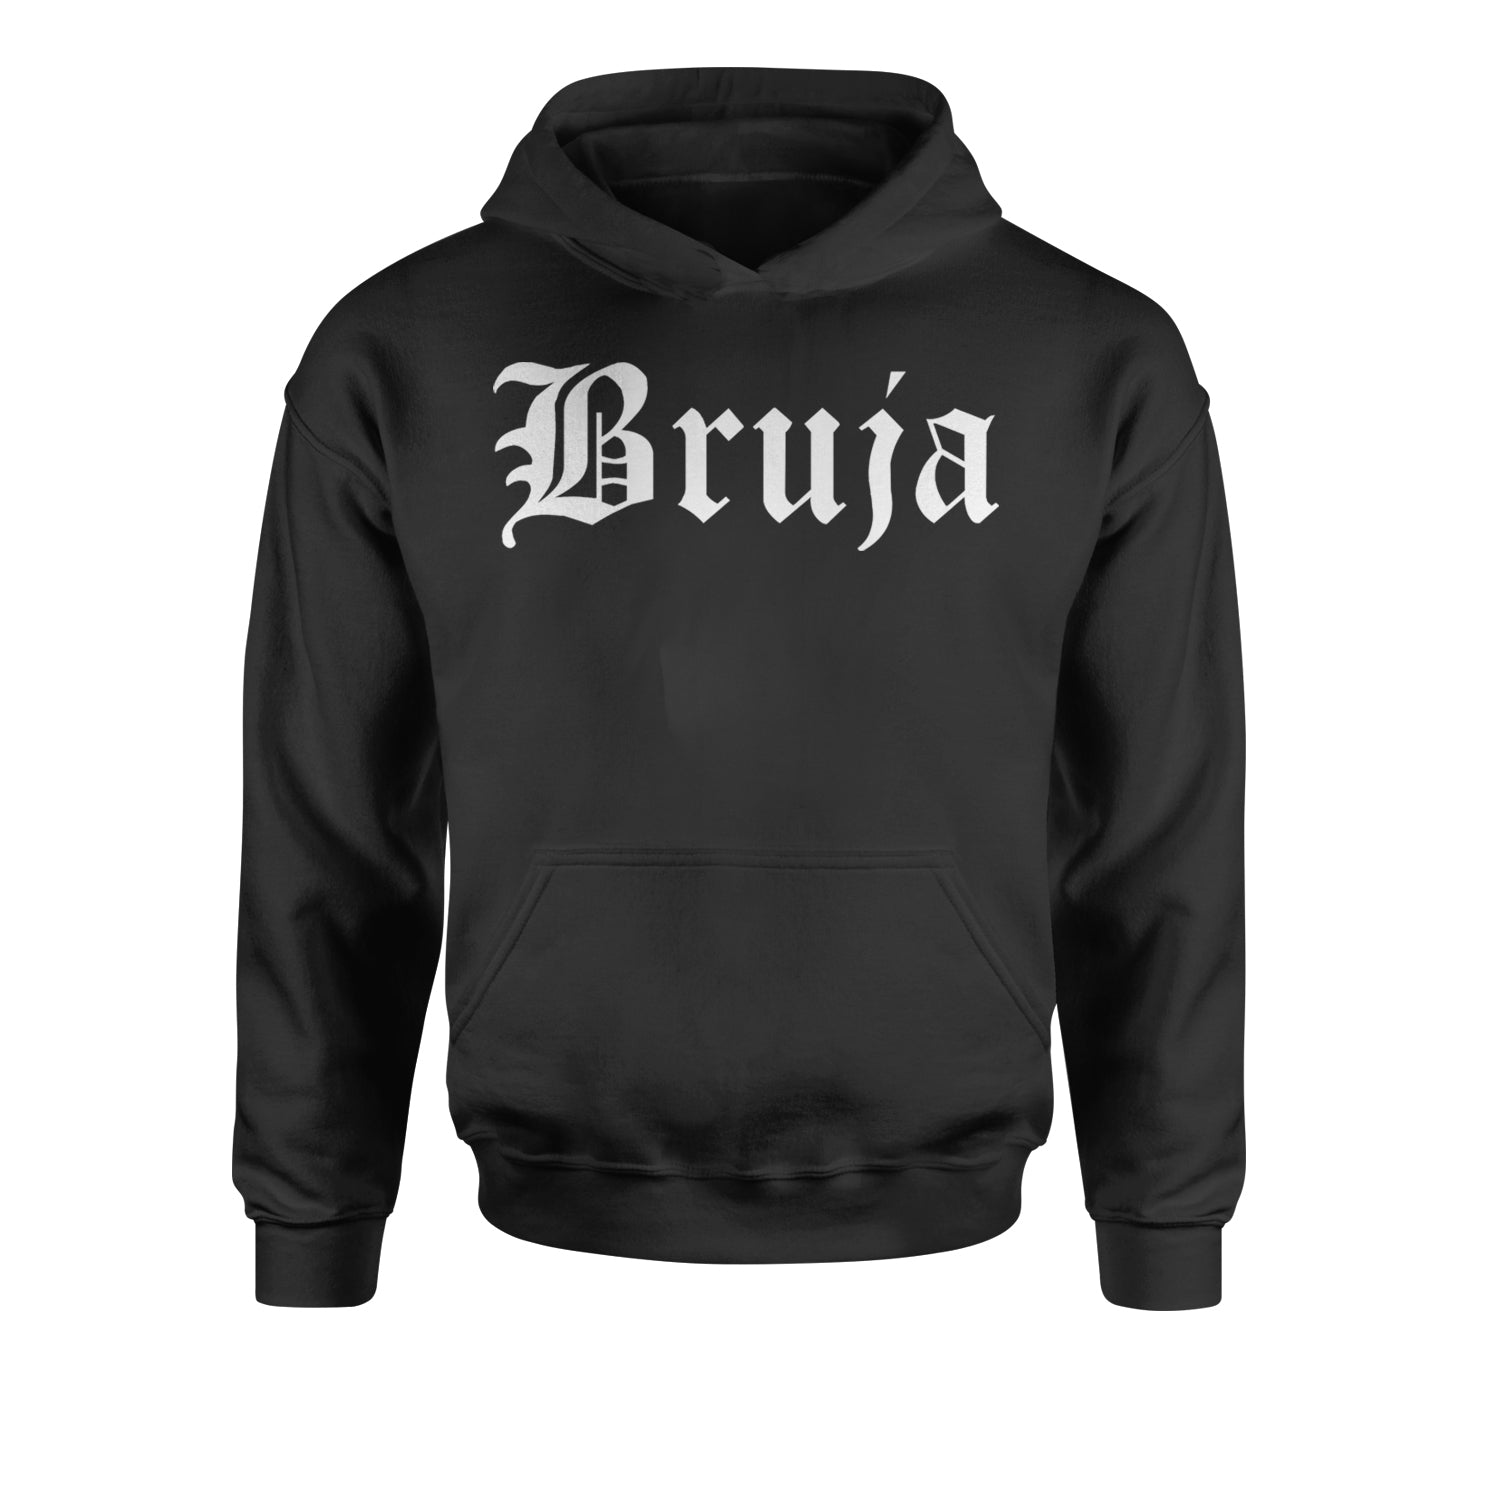 Bruja Gothic Spanish Witch Youth-Sized Hoodie